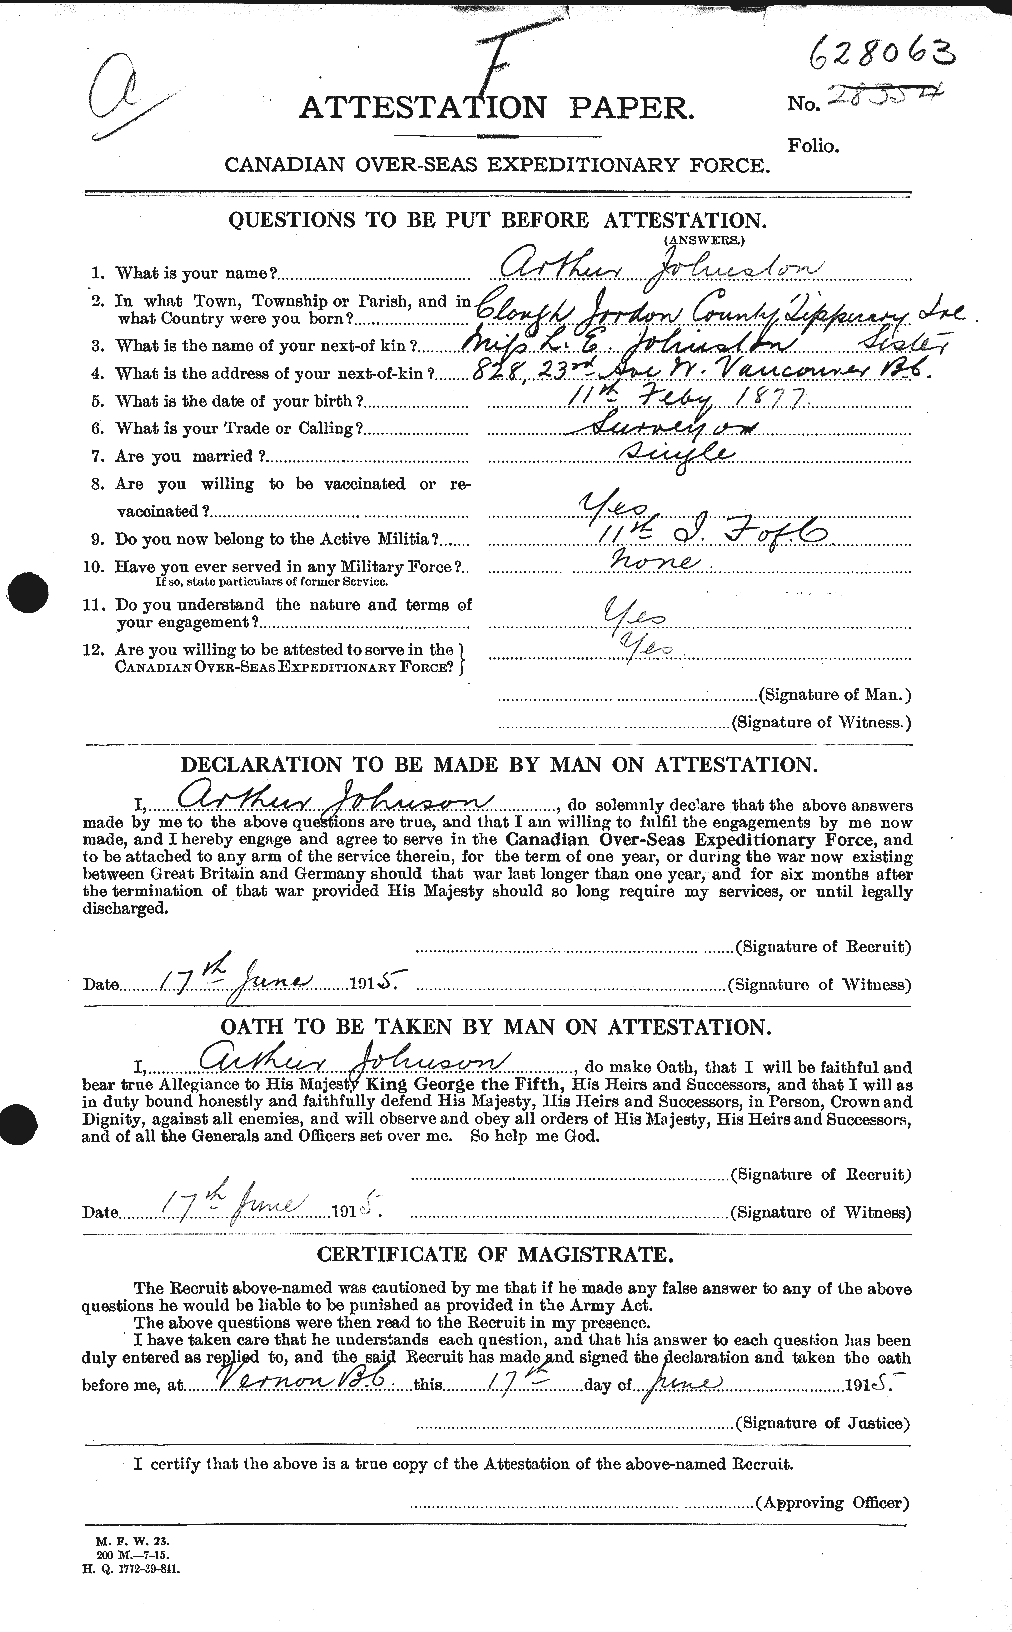 Personnel Records of the First World War - CEF 421034a